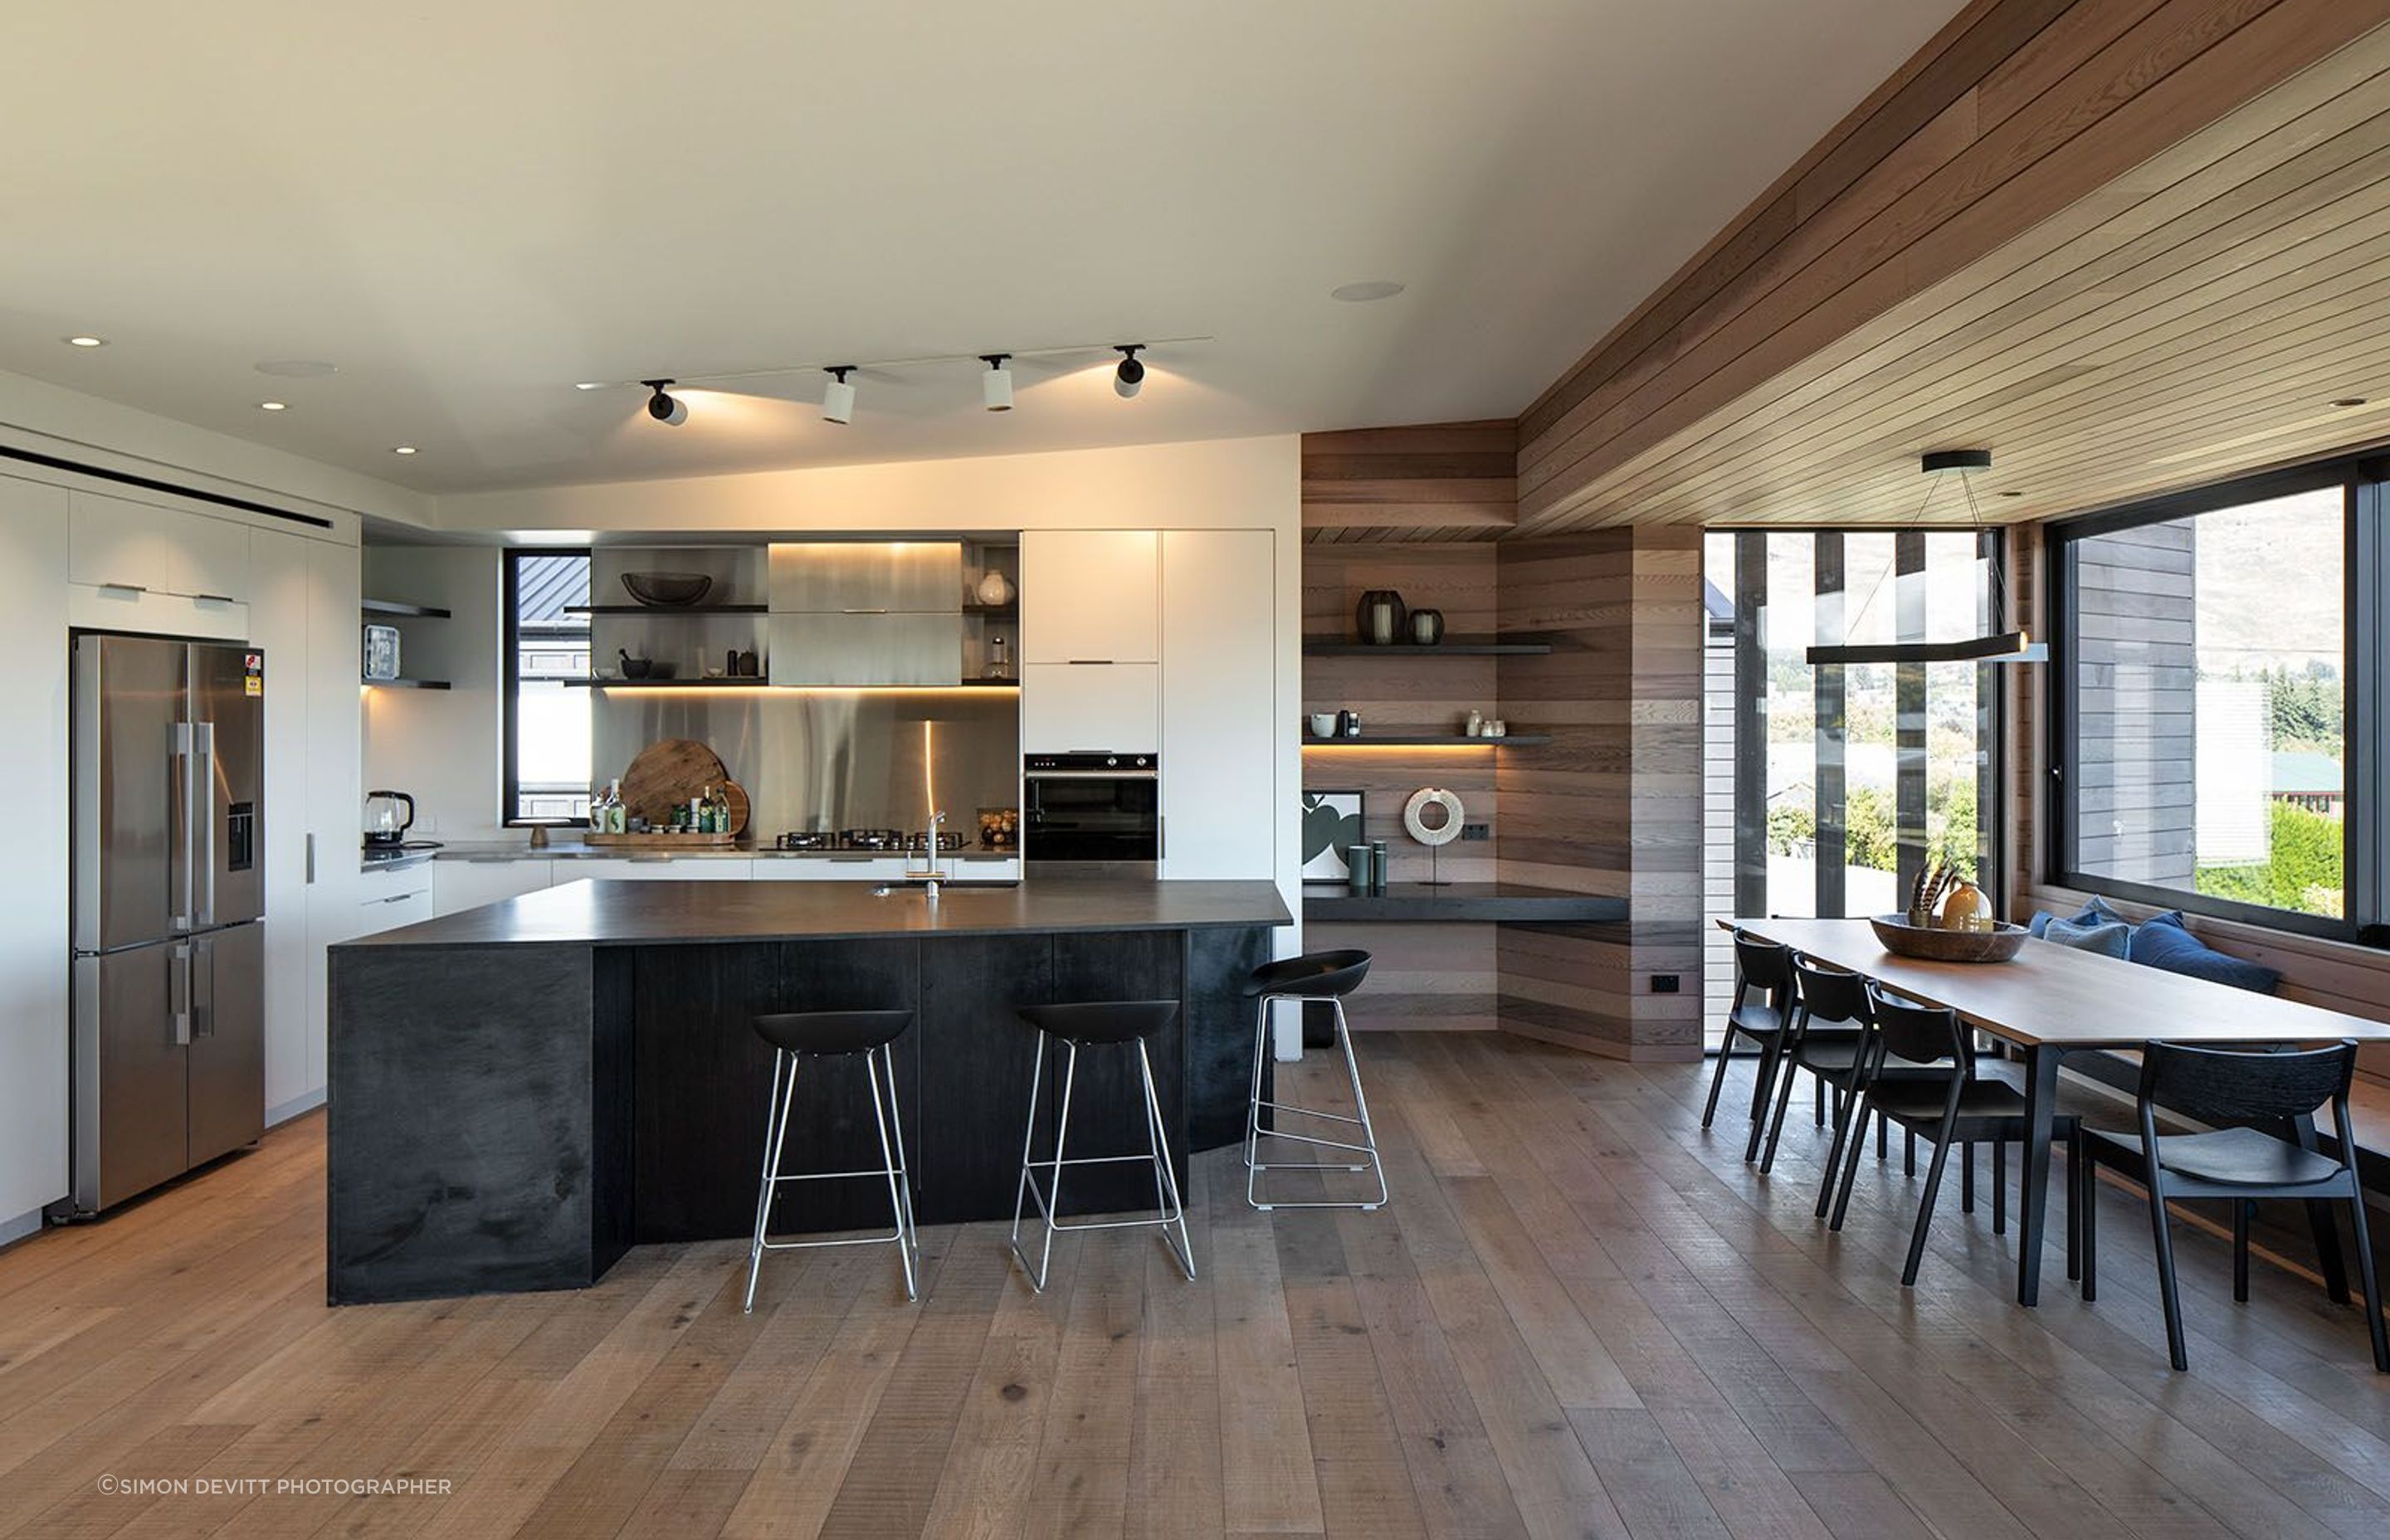 The monochromatic kitchen is complemented by wide-plank oak flooring, built-in cedar shelves and a lowered cedar ceiling over the dining area that runs out into the lounge wall and balcony soffit.